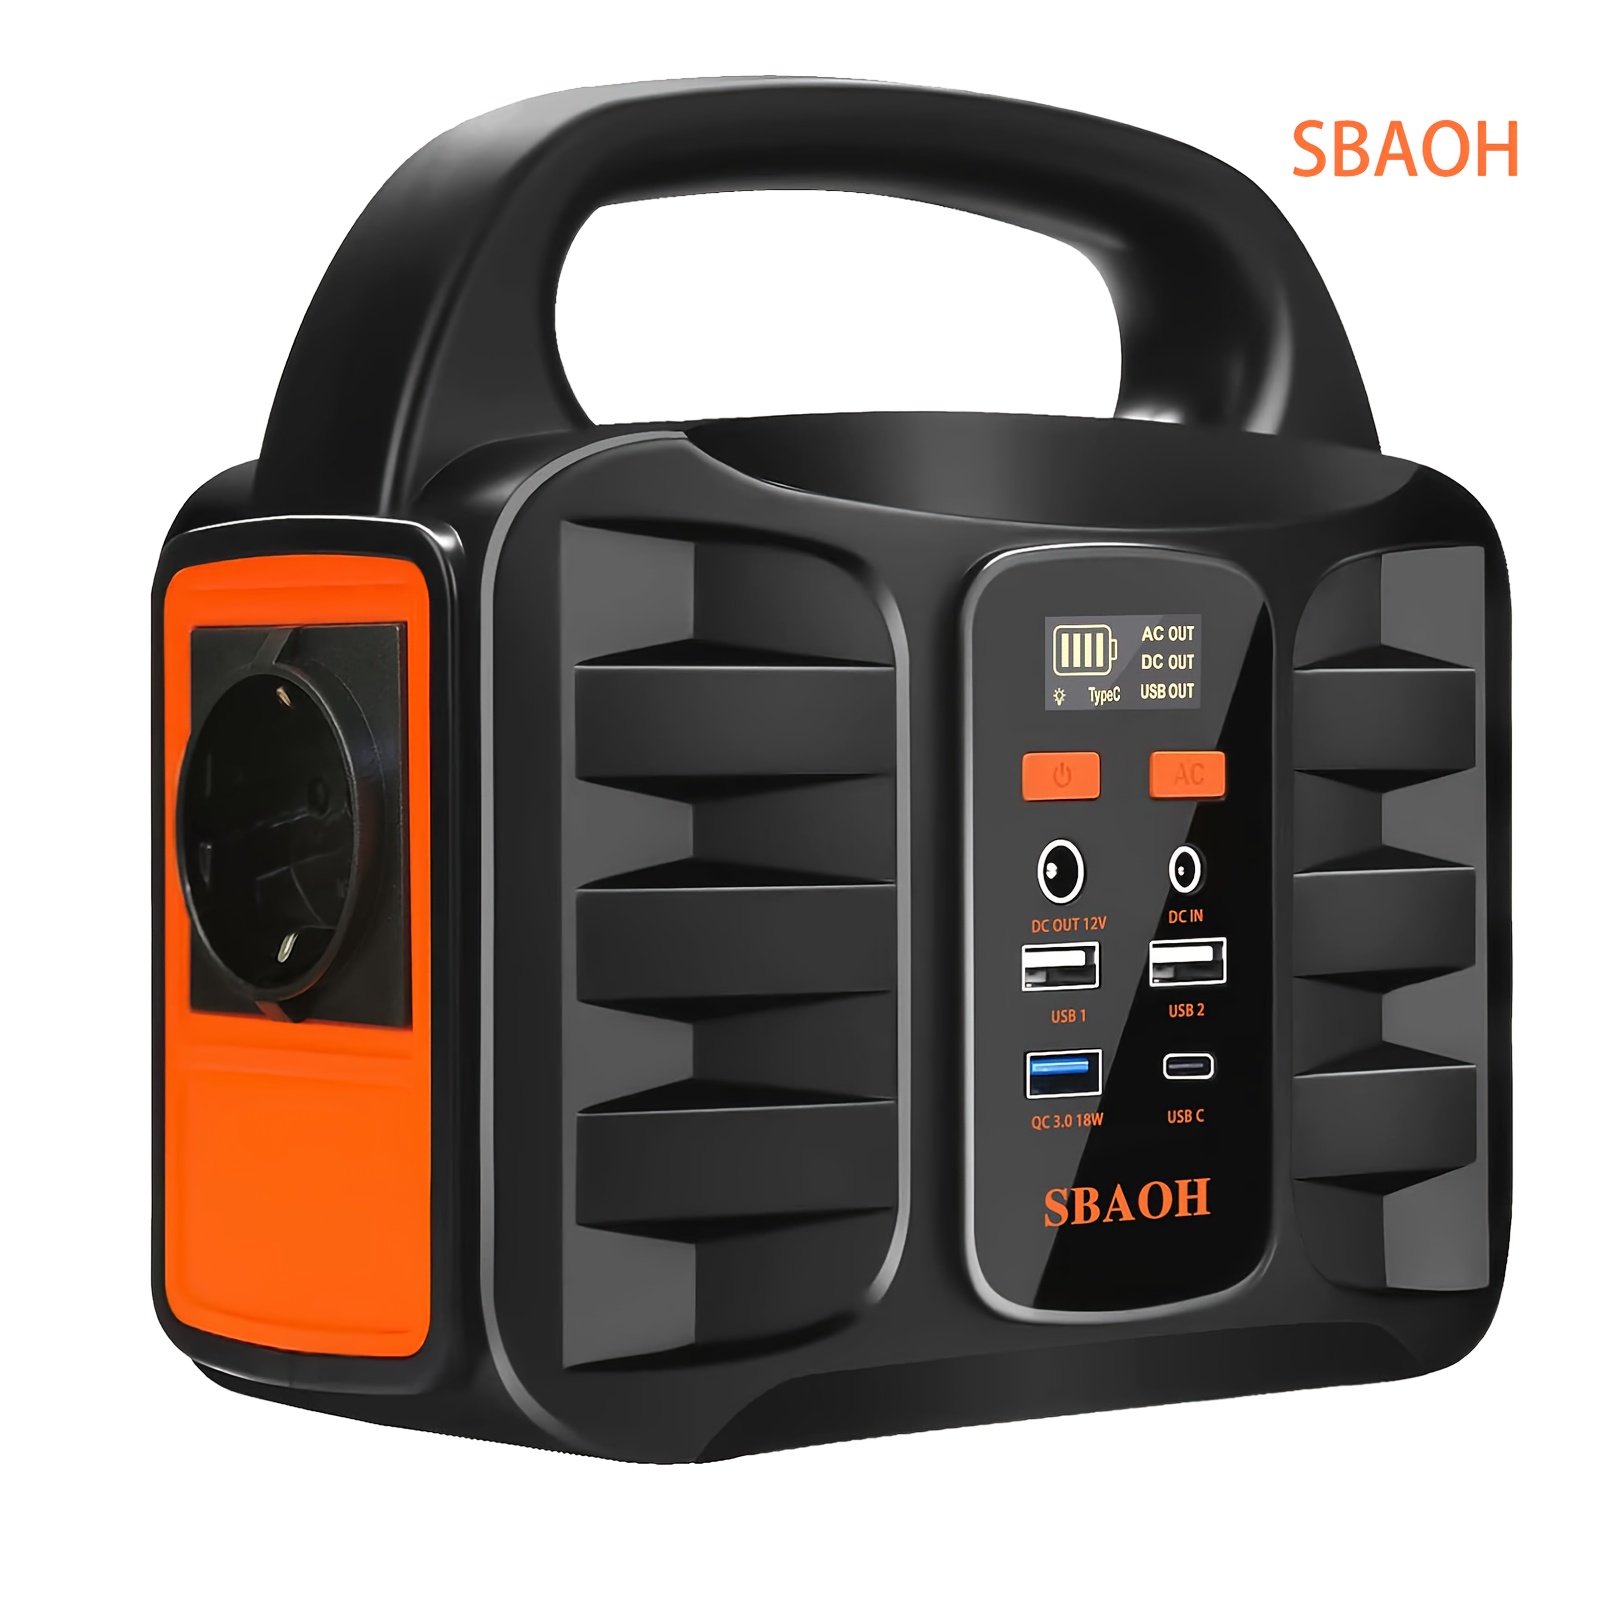 

Sbaoh Portable Power Station 194wh, 200w Battery With Ac/usb Output, Mobile Power Generator For Travel Camping Outdoors Emergency